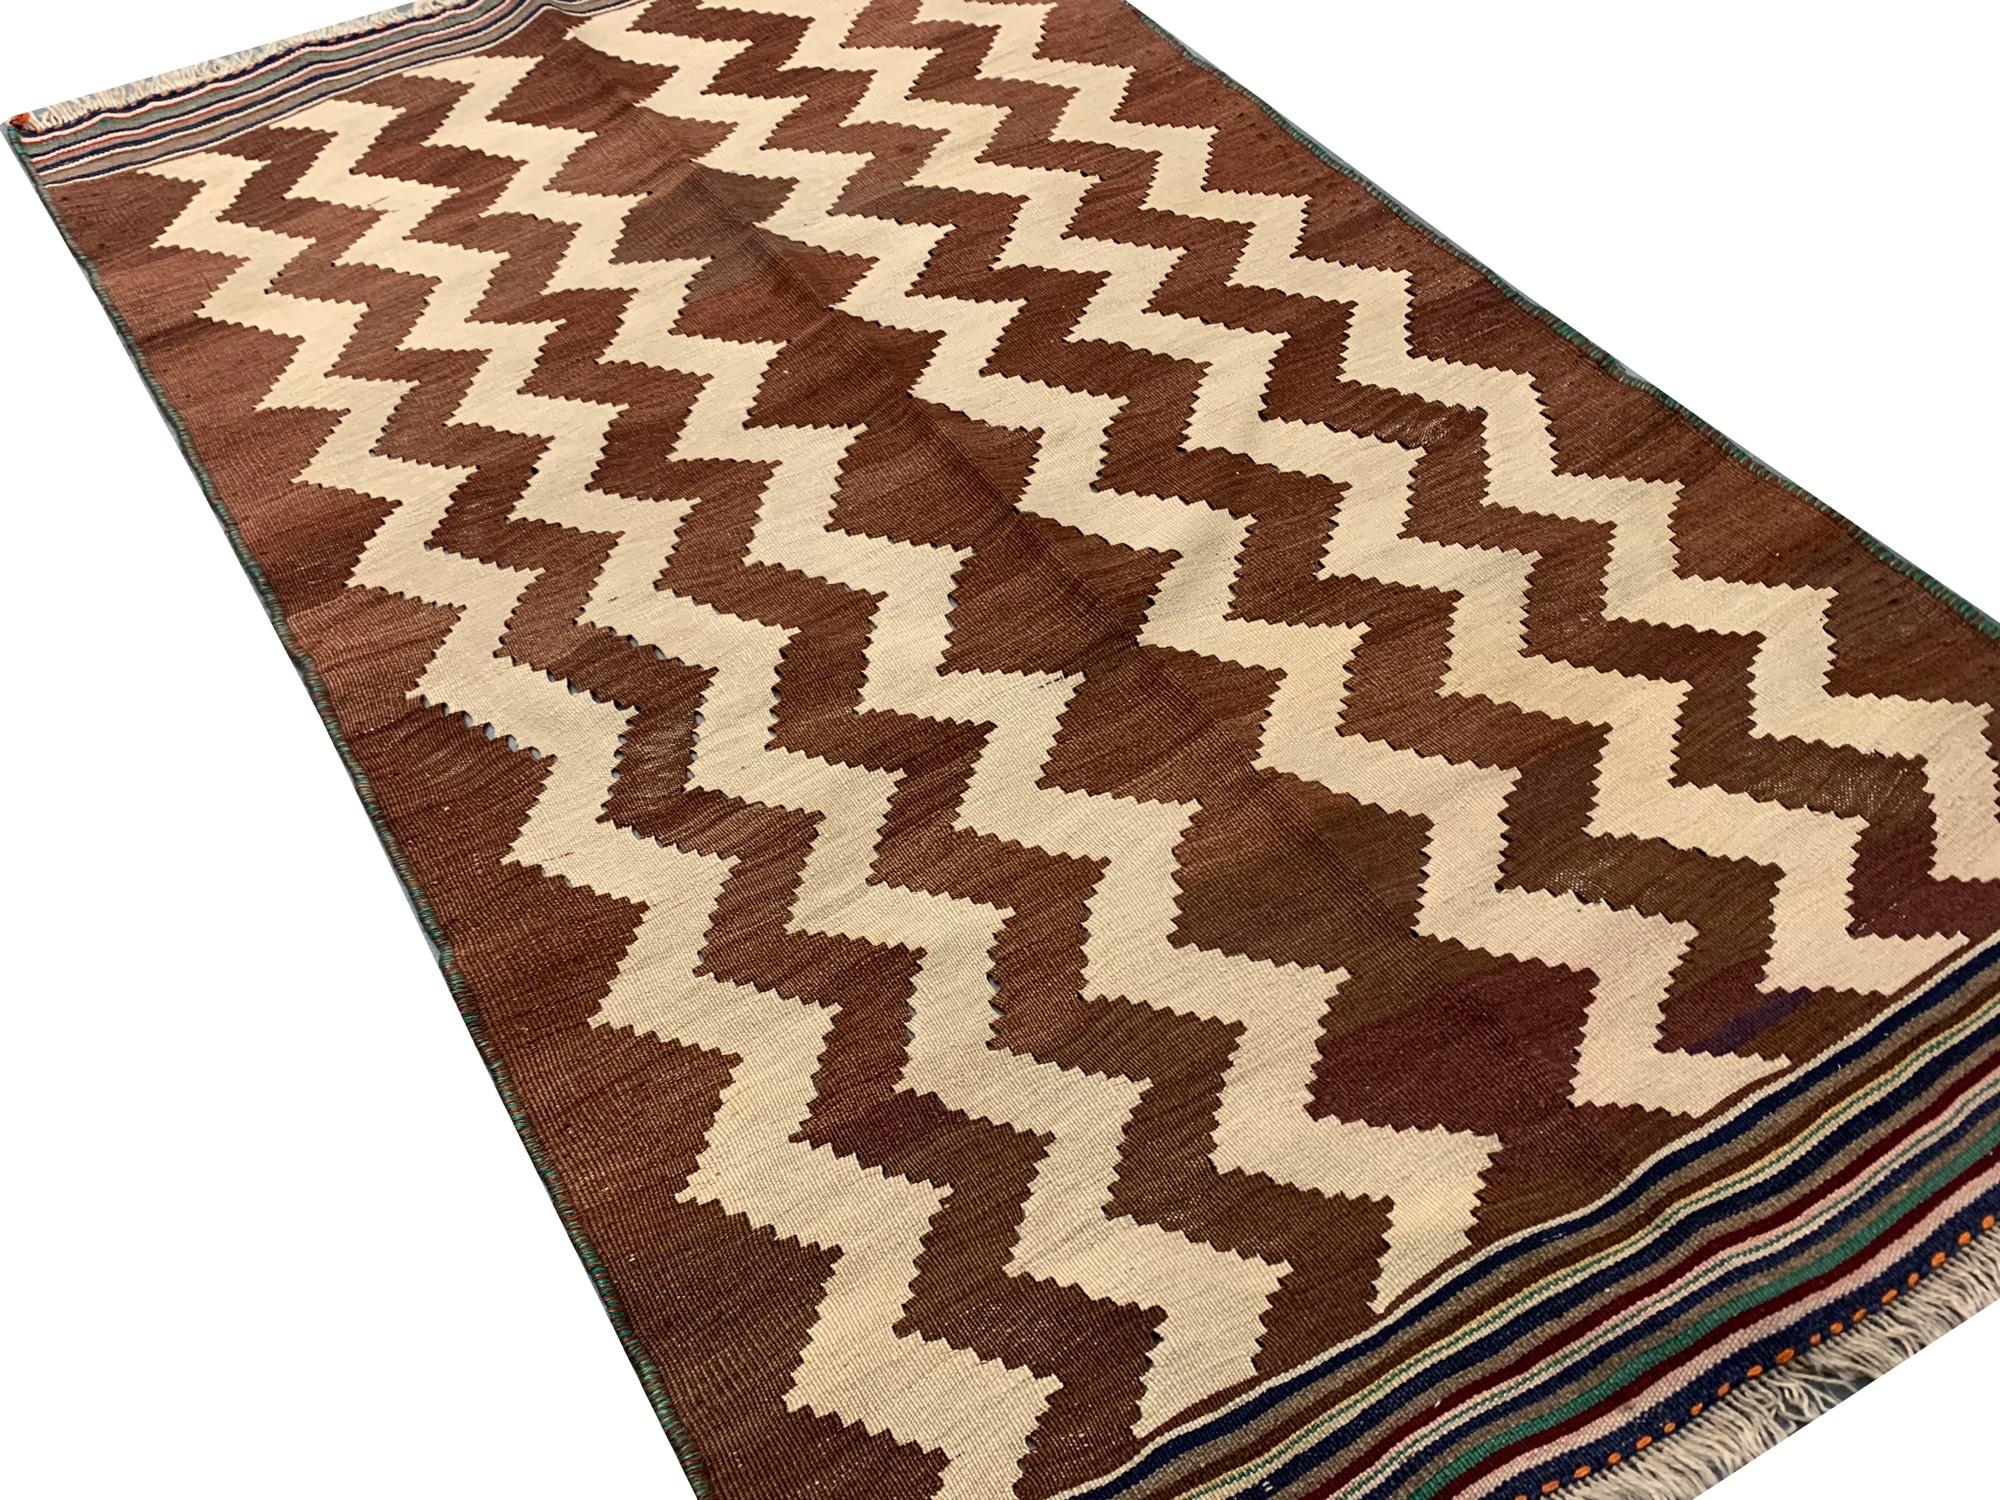 Crafted with meticulous hand-knotting, boasts a fusion of tradition and timeless elegance. The weave exudes a sense of authenticity, setting it apart as a truly exceptional find. The pattern is woven on a brown background and features beige and